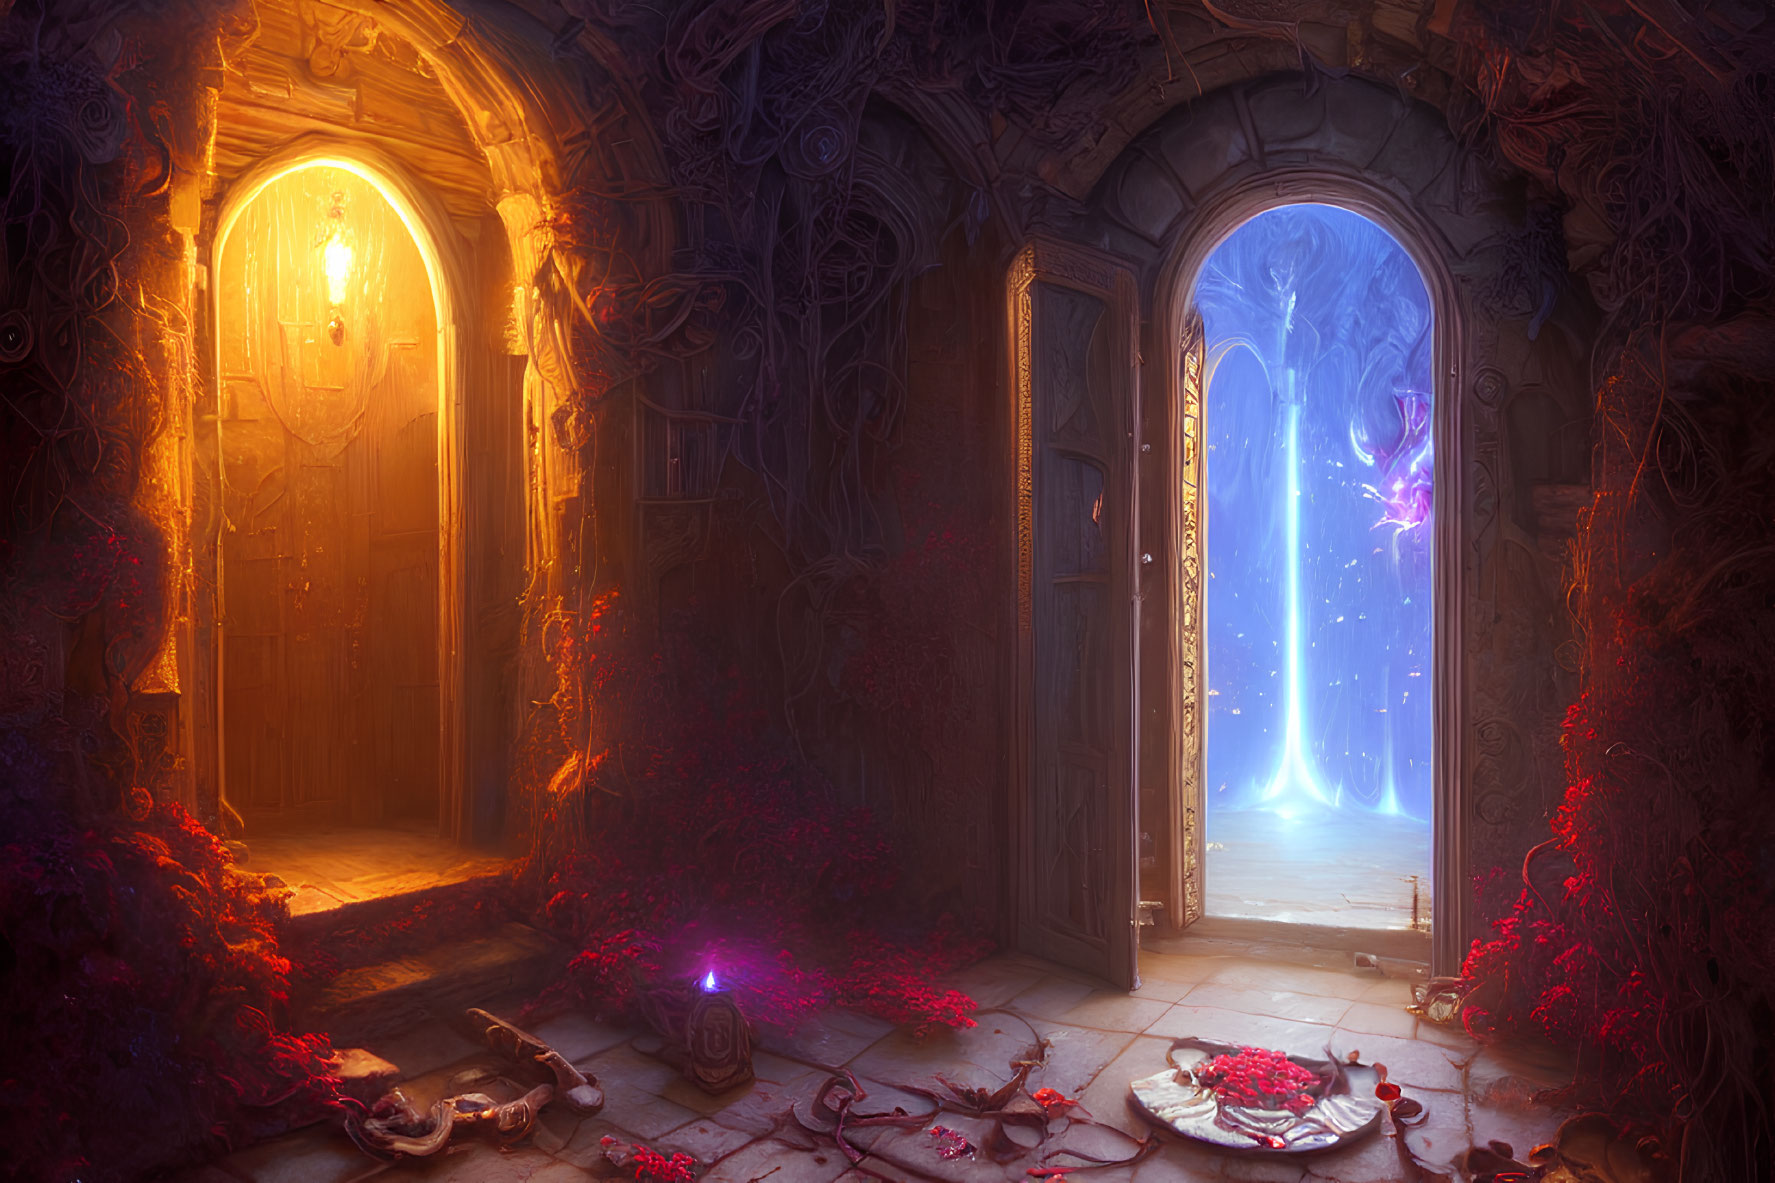 Mystical room with ornate glowing and magical doors, vines, and red petals scattered.